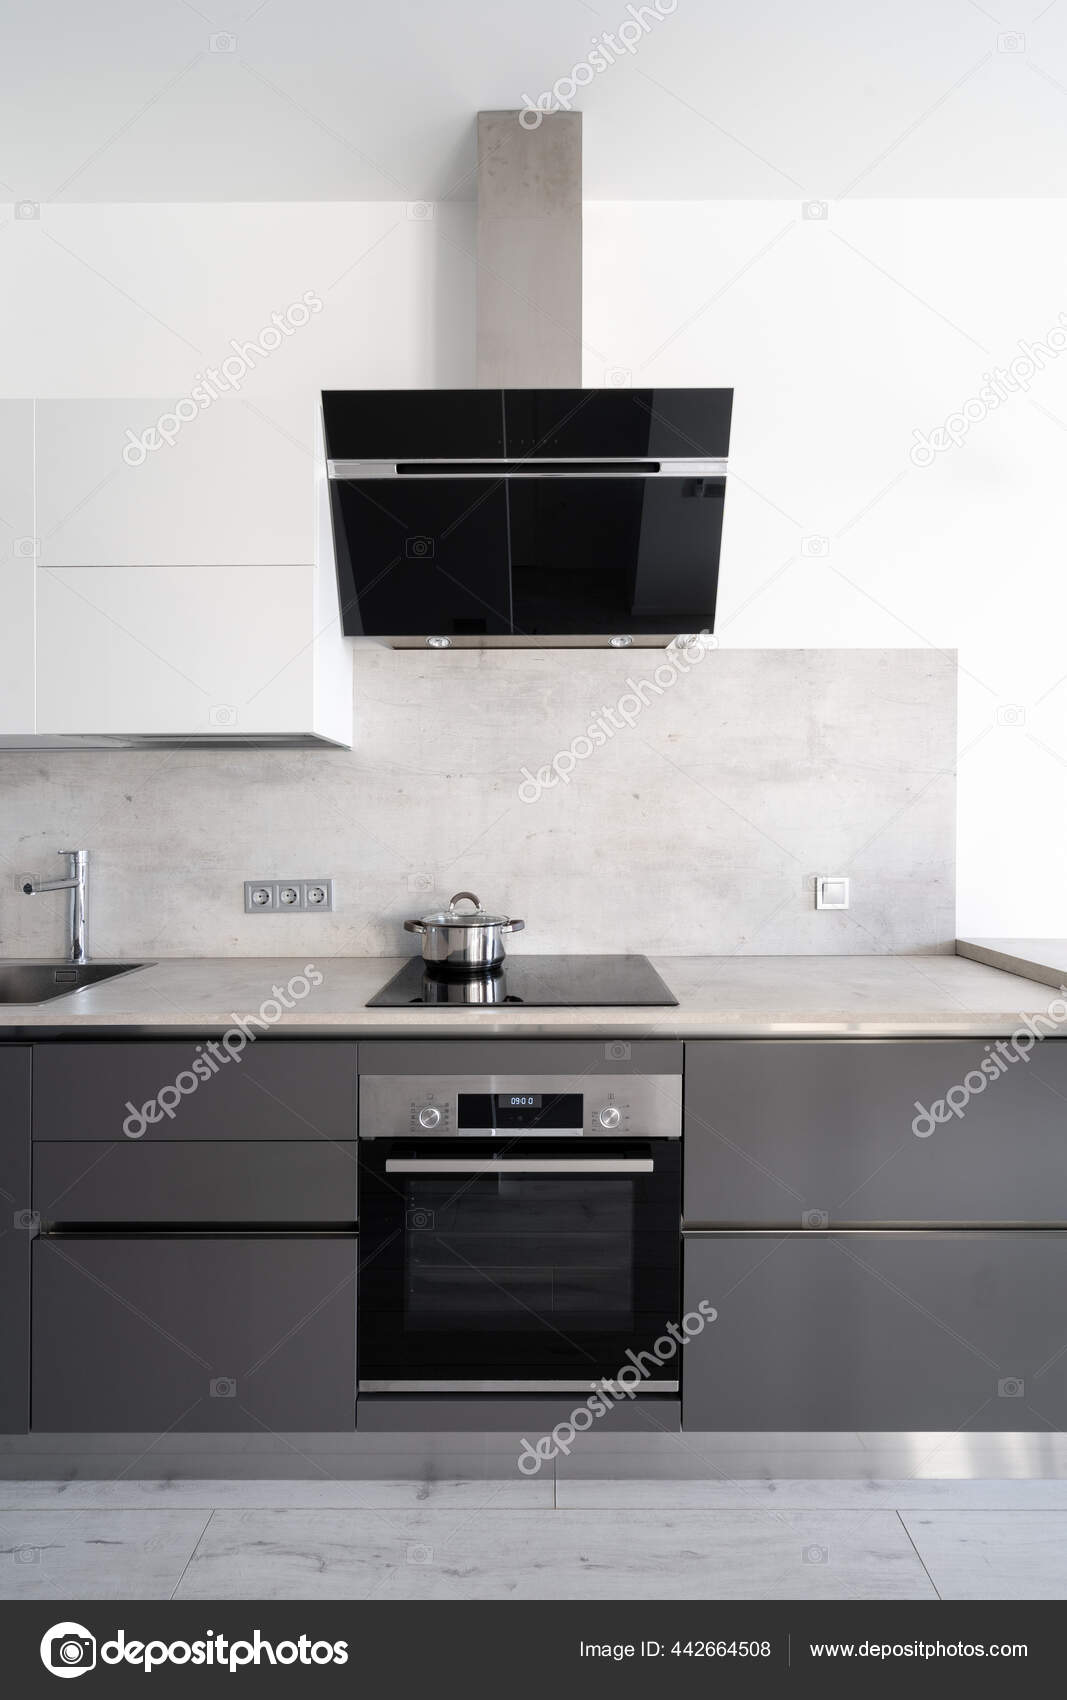 Vertical Electric Oven, Electric Kitchen Oven